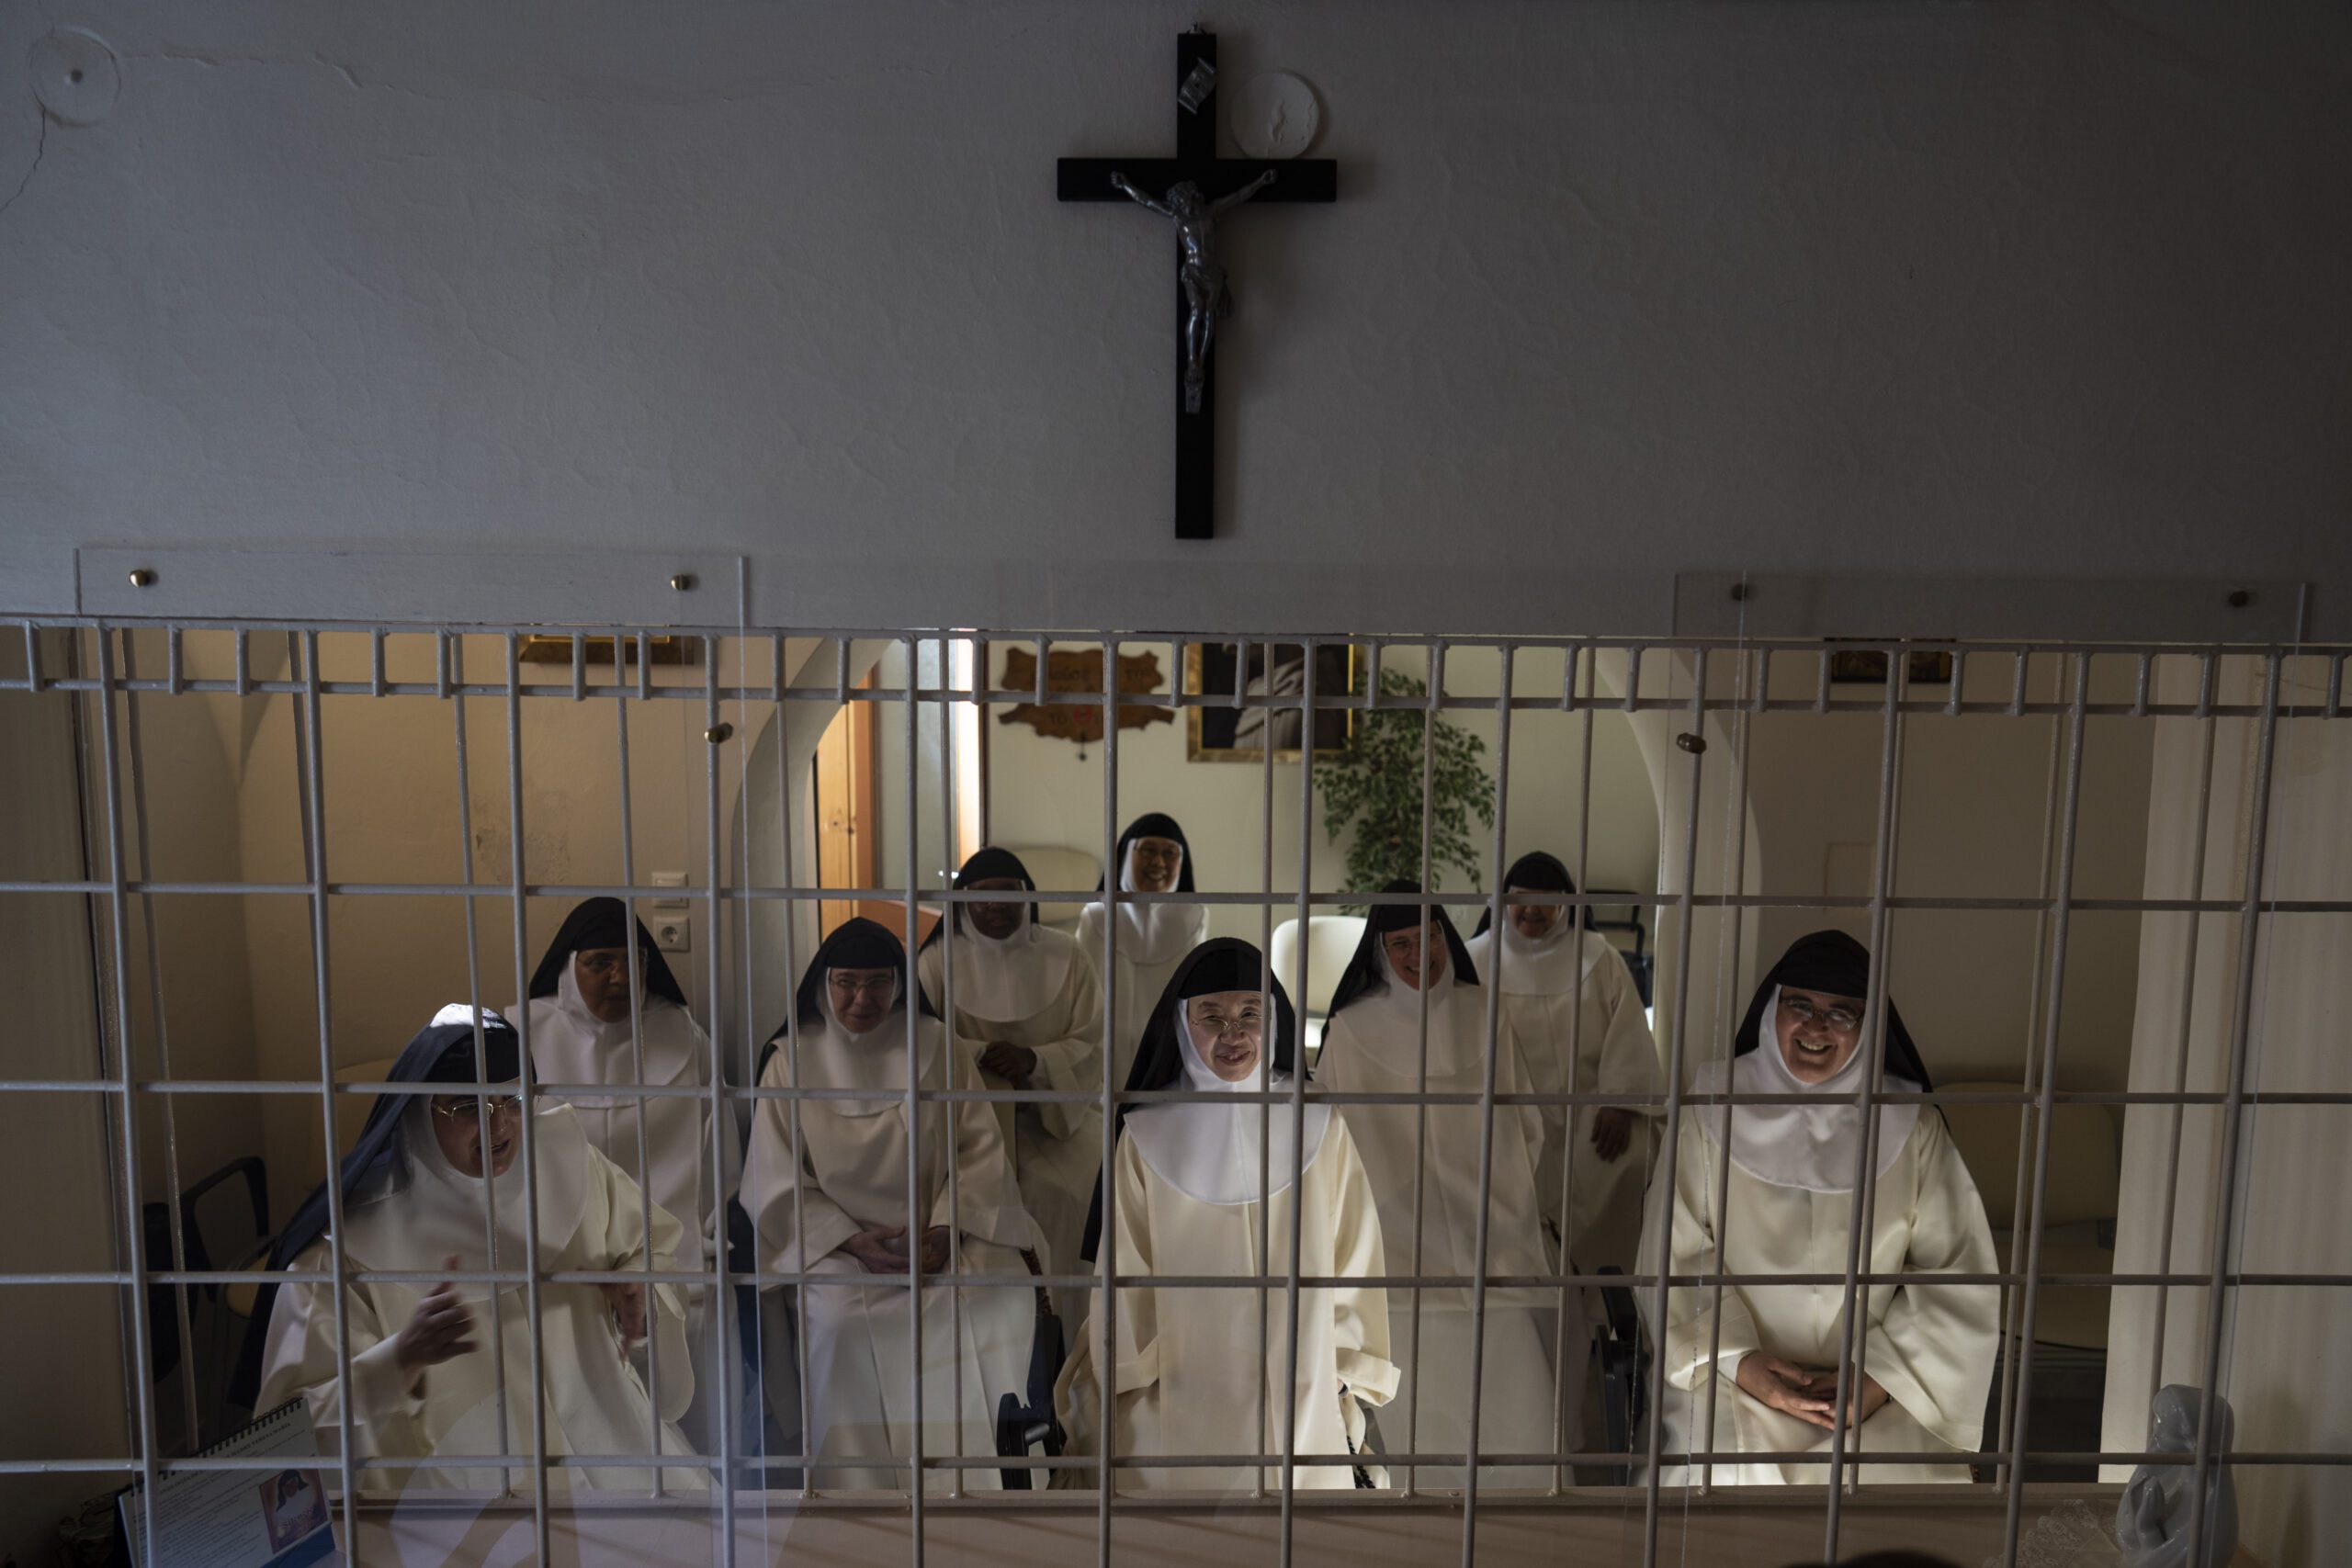 Nuns speak to journalists from behind a white iron grille in the parlor of the Monastery of St. Catherine on the Greek island of Santorini on Tuesday, June 14, 2022. In the first row, from right to left, are Sister Lucía María de Fátima, the prioress, Sister María de la Trinidad, and Sister María Guadalupe. The convent is home to more than a dozen nuns who devote themselves to prayer and leave only for medical or government necessities. (AP Photo/Petros Giannakouris)